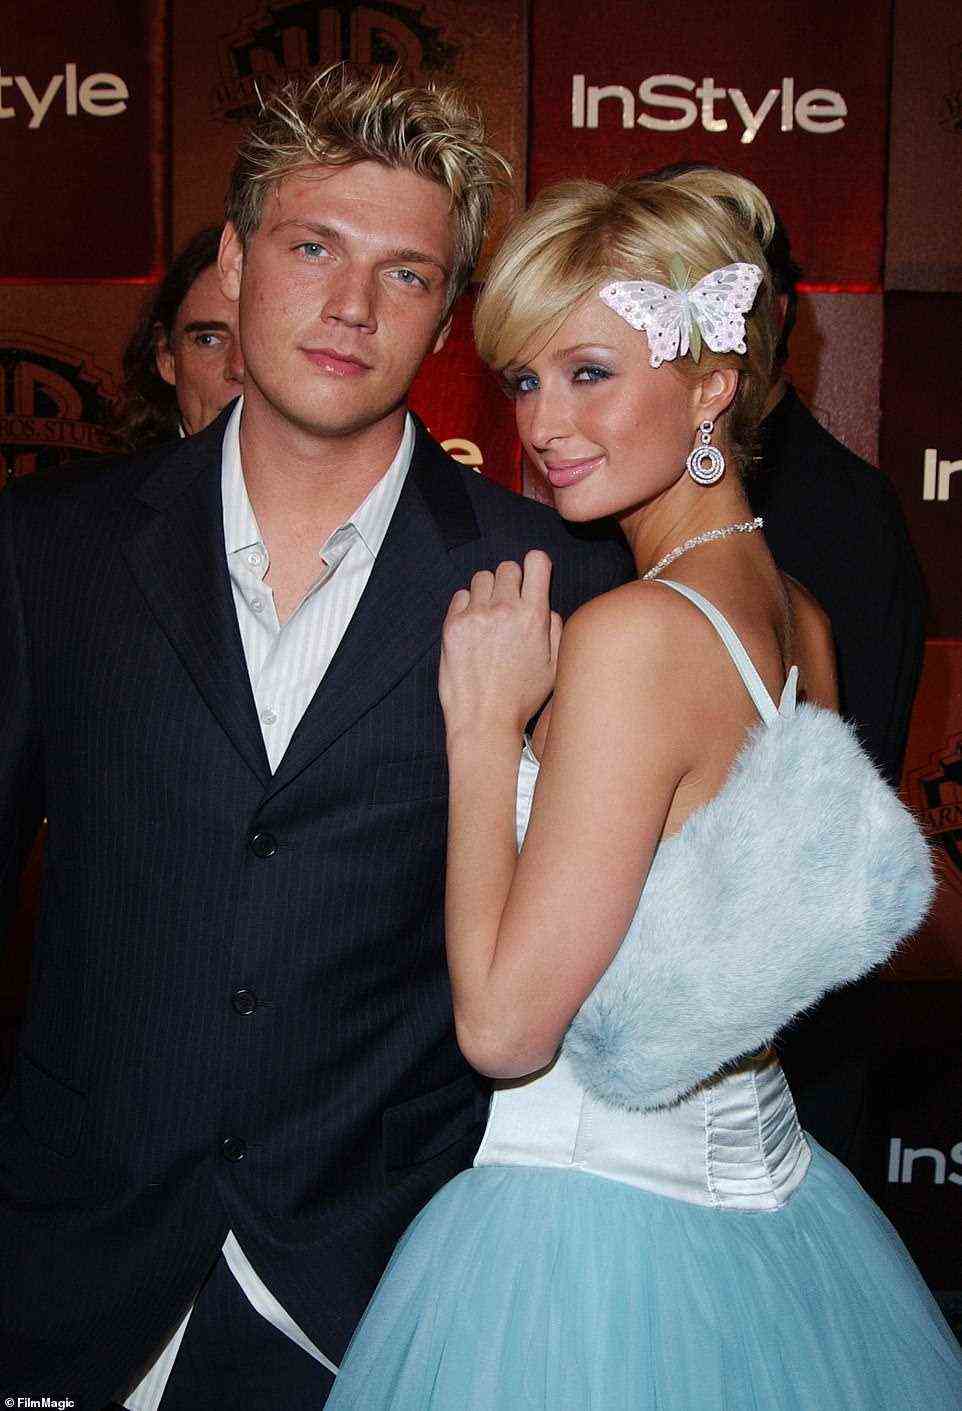 Paris and Nick Carter had a brief fling in 2004, but according to the Backstreet Boys singer, it was not a healthy relationship. He told People Magazine that it was 'totally based on distrust'